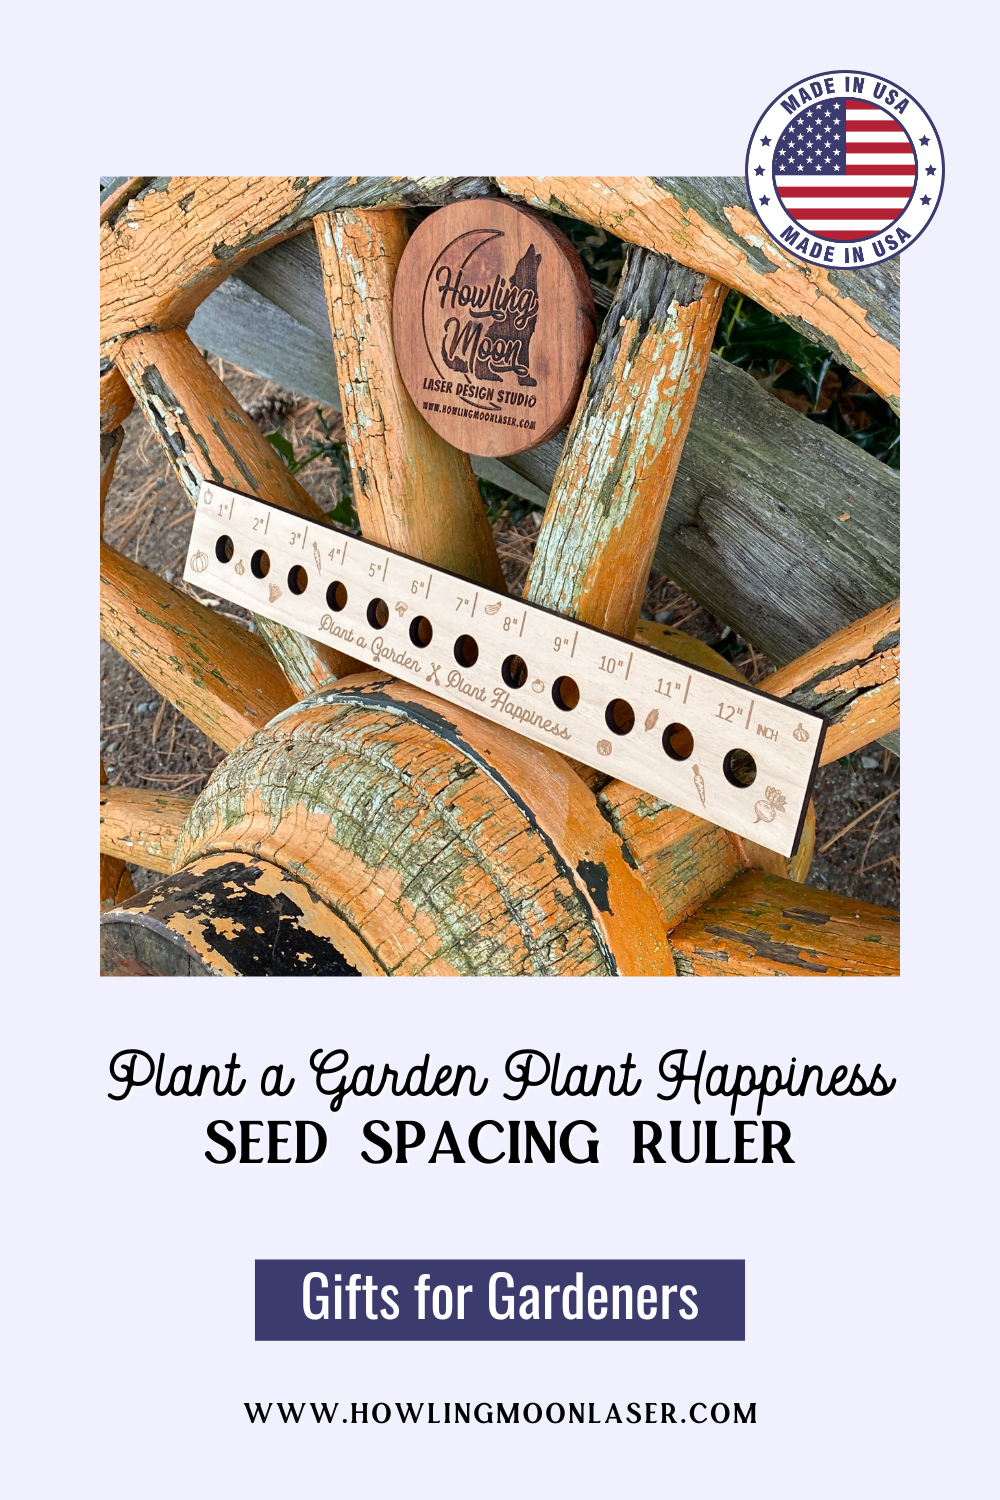 Plant a Garden Plant Happiness Seed Spacing Ruler by Howling Moon Laser Design Studio in Virginia USA